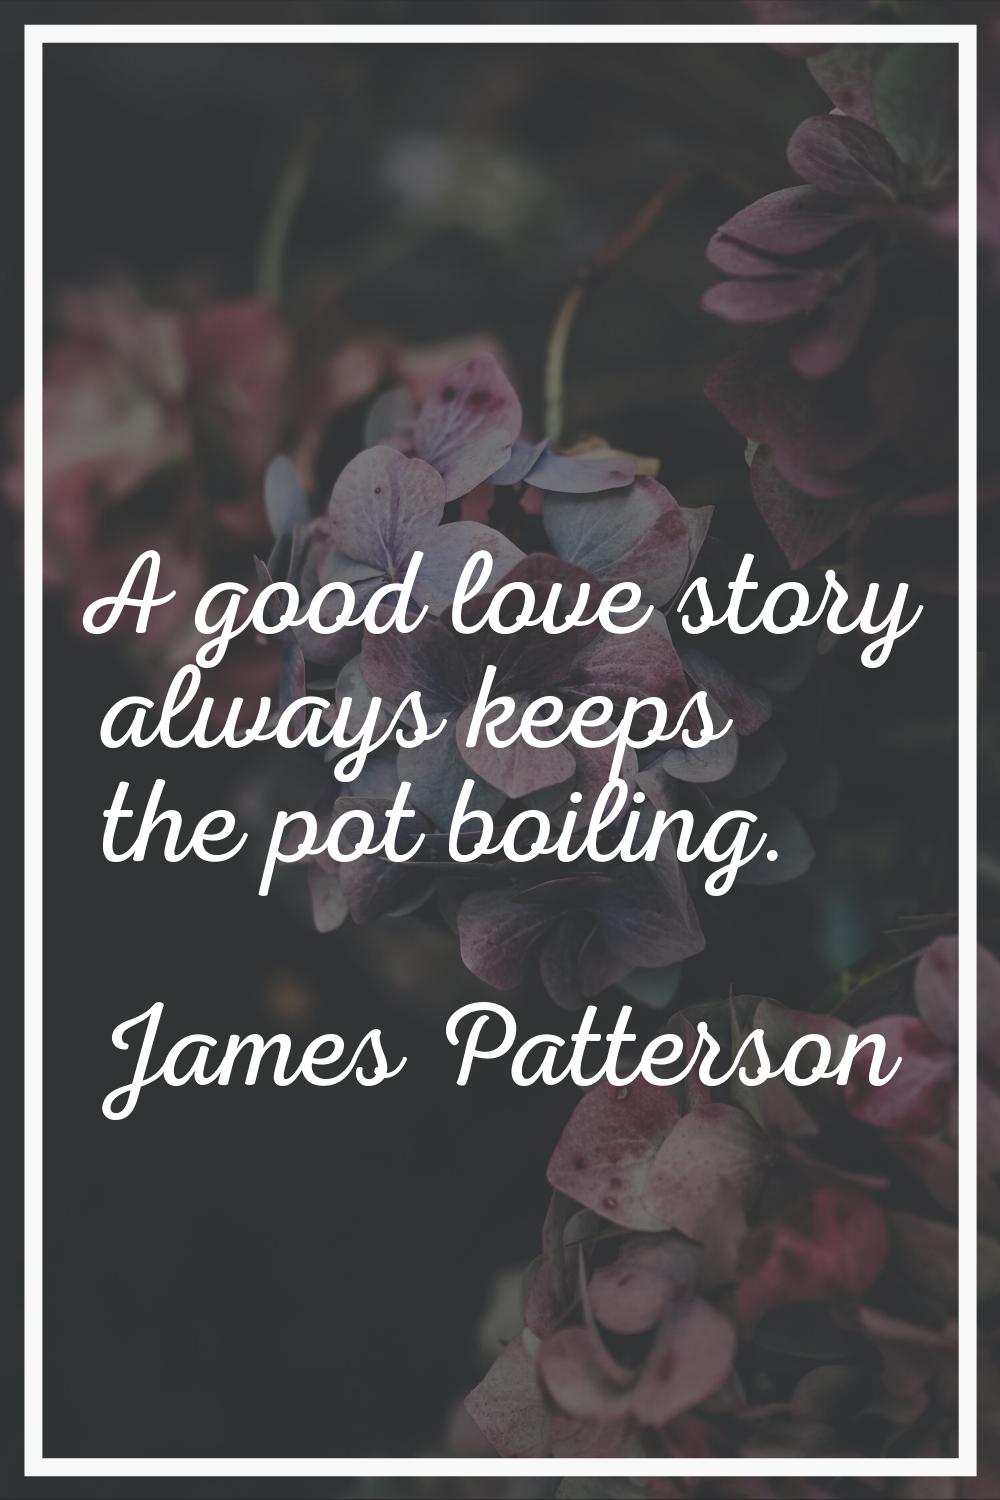 A good love story always keeps the pot boiling.